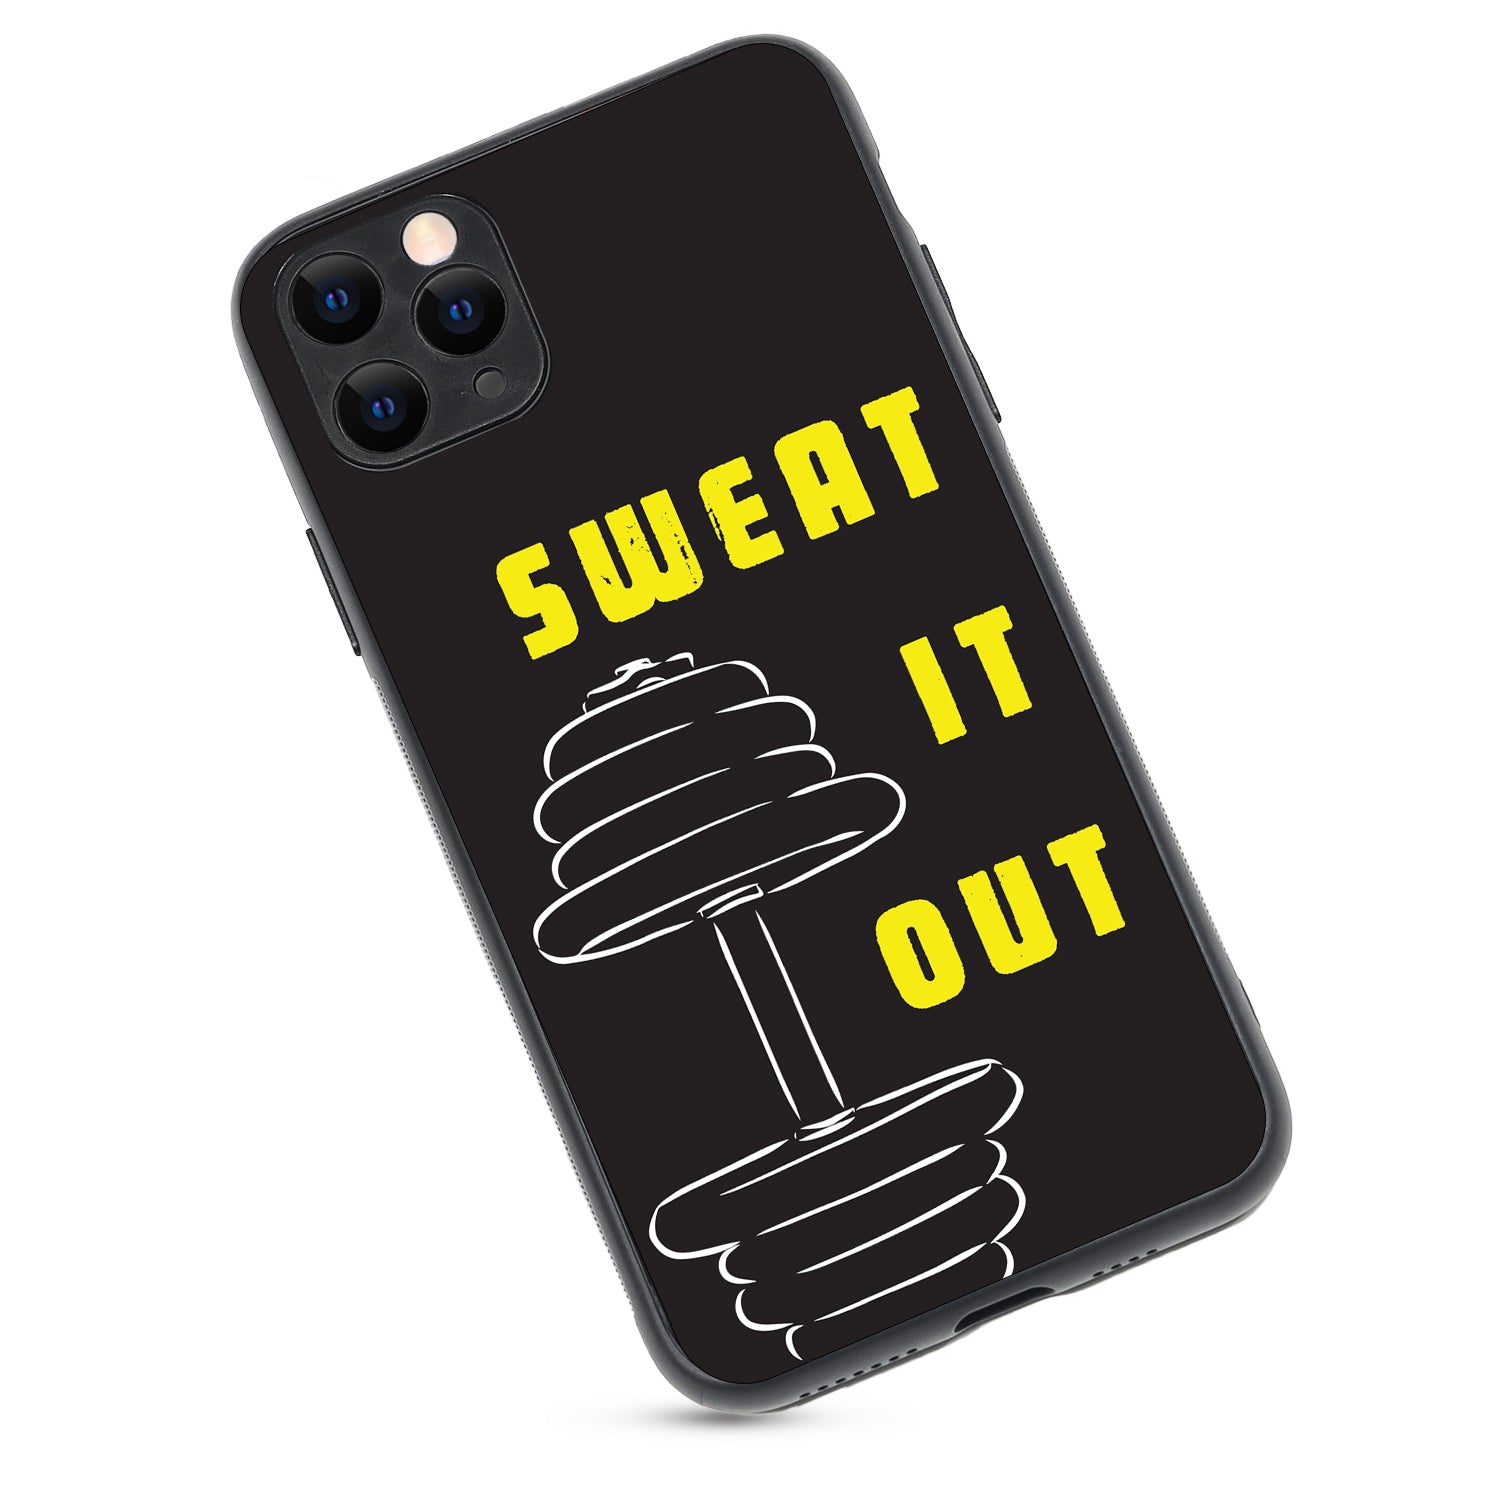 Sweat It Out Motivational Quotes iPhone 11 Pro Max Case